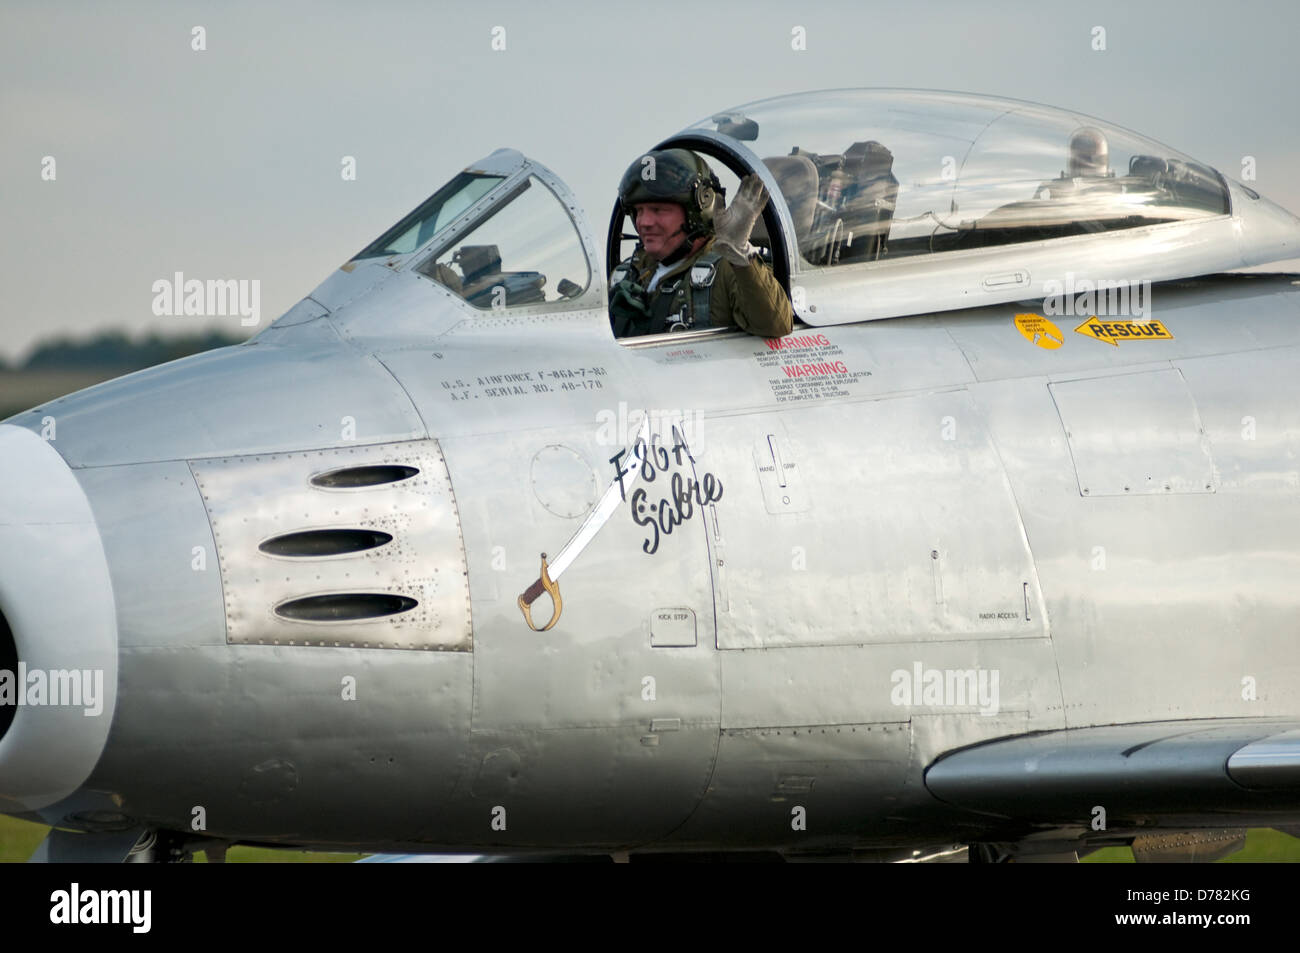 A close-up view of a 1950s USAF F86 jet fighter taxing along an airfield runway, with pilot waving. Stock Photo